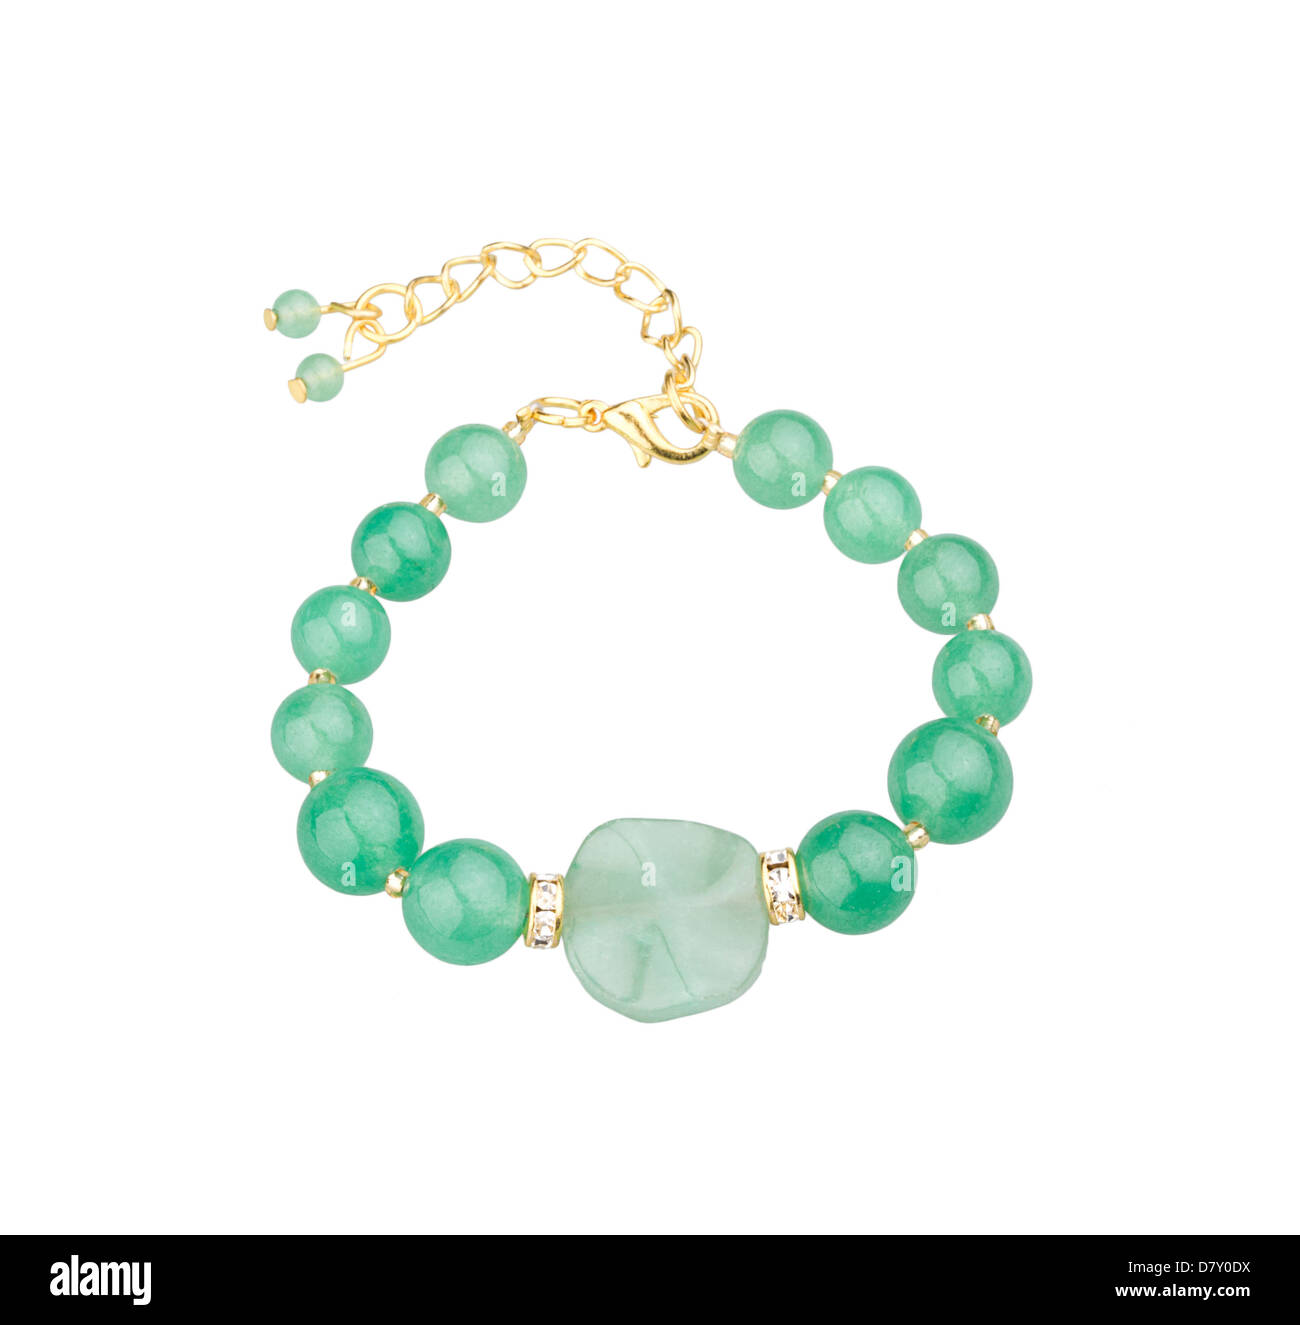 green gemstone bracelet a cute jewelry from nature Stock Photo